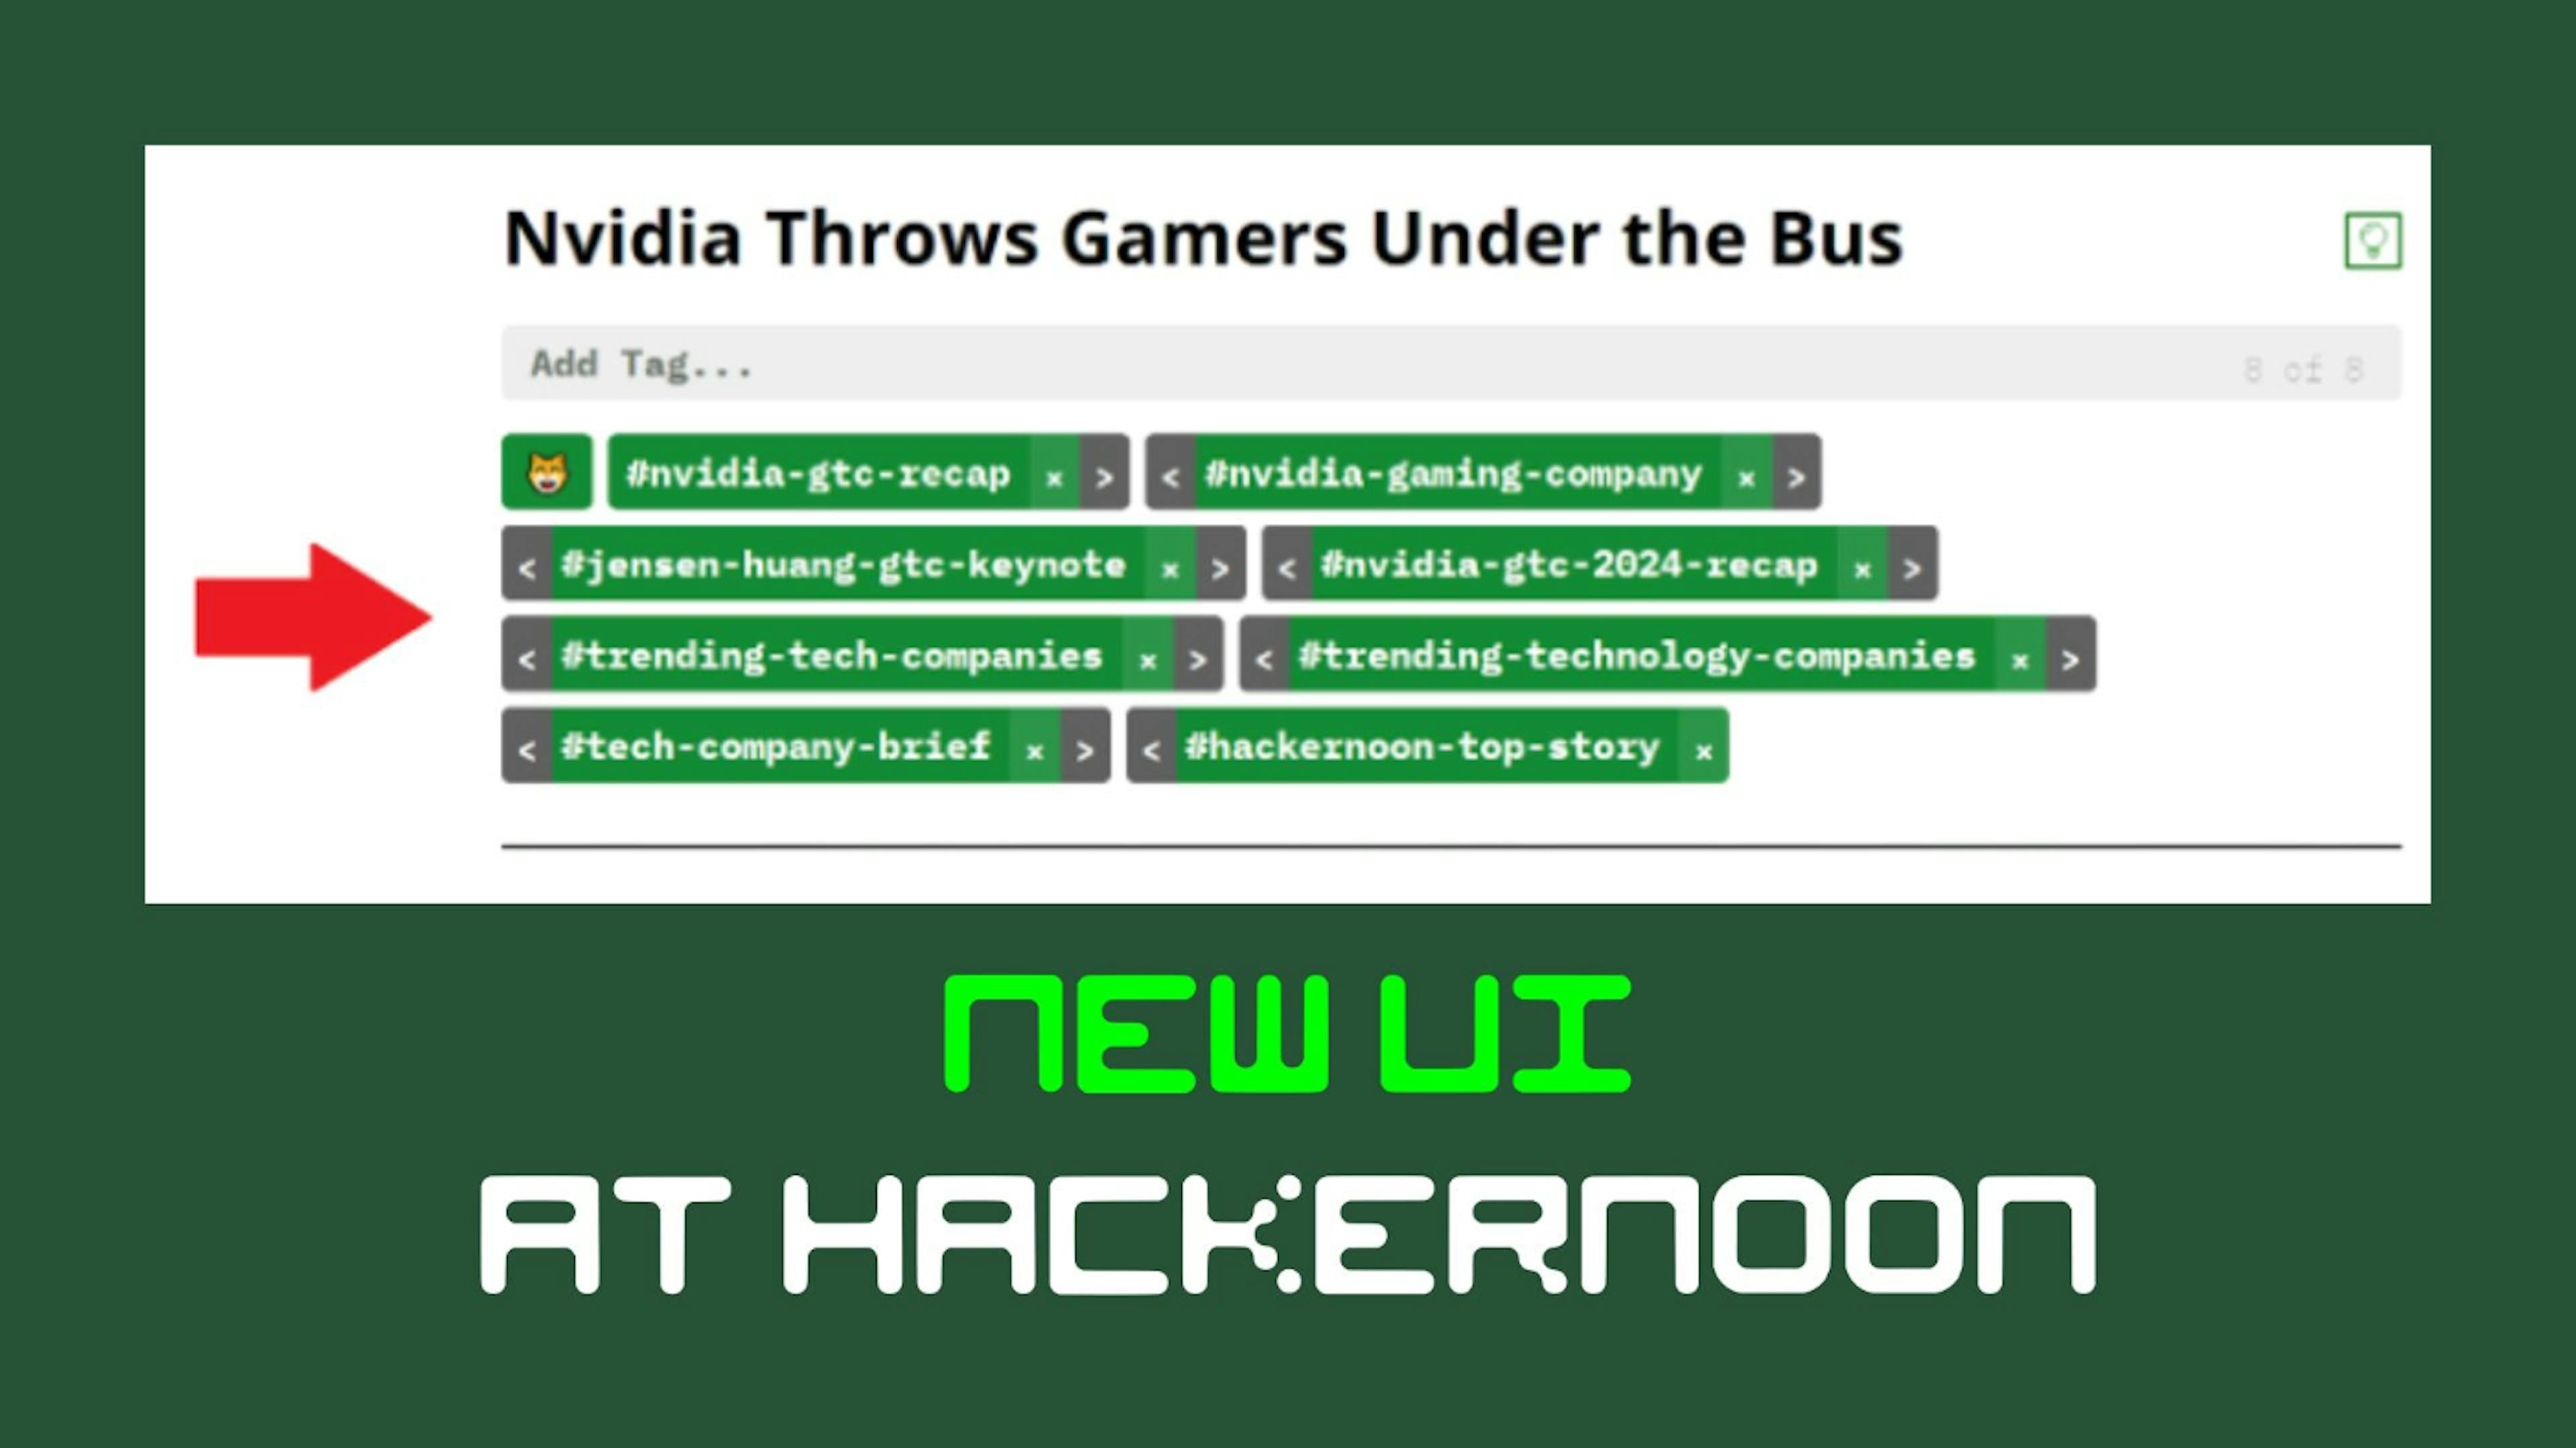 featured image - Understand the New HackerNoon UI and Let’s Get Submittin’ (Some Cool Stories)